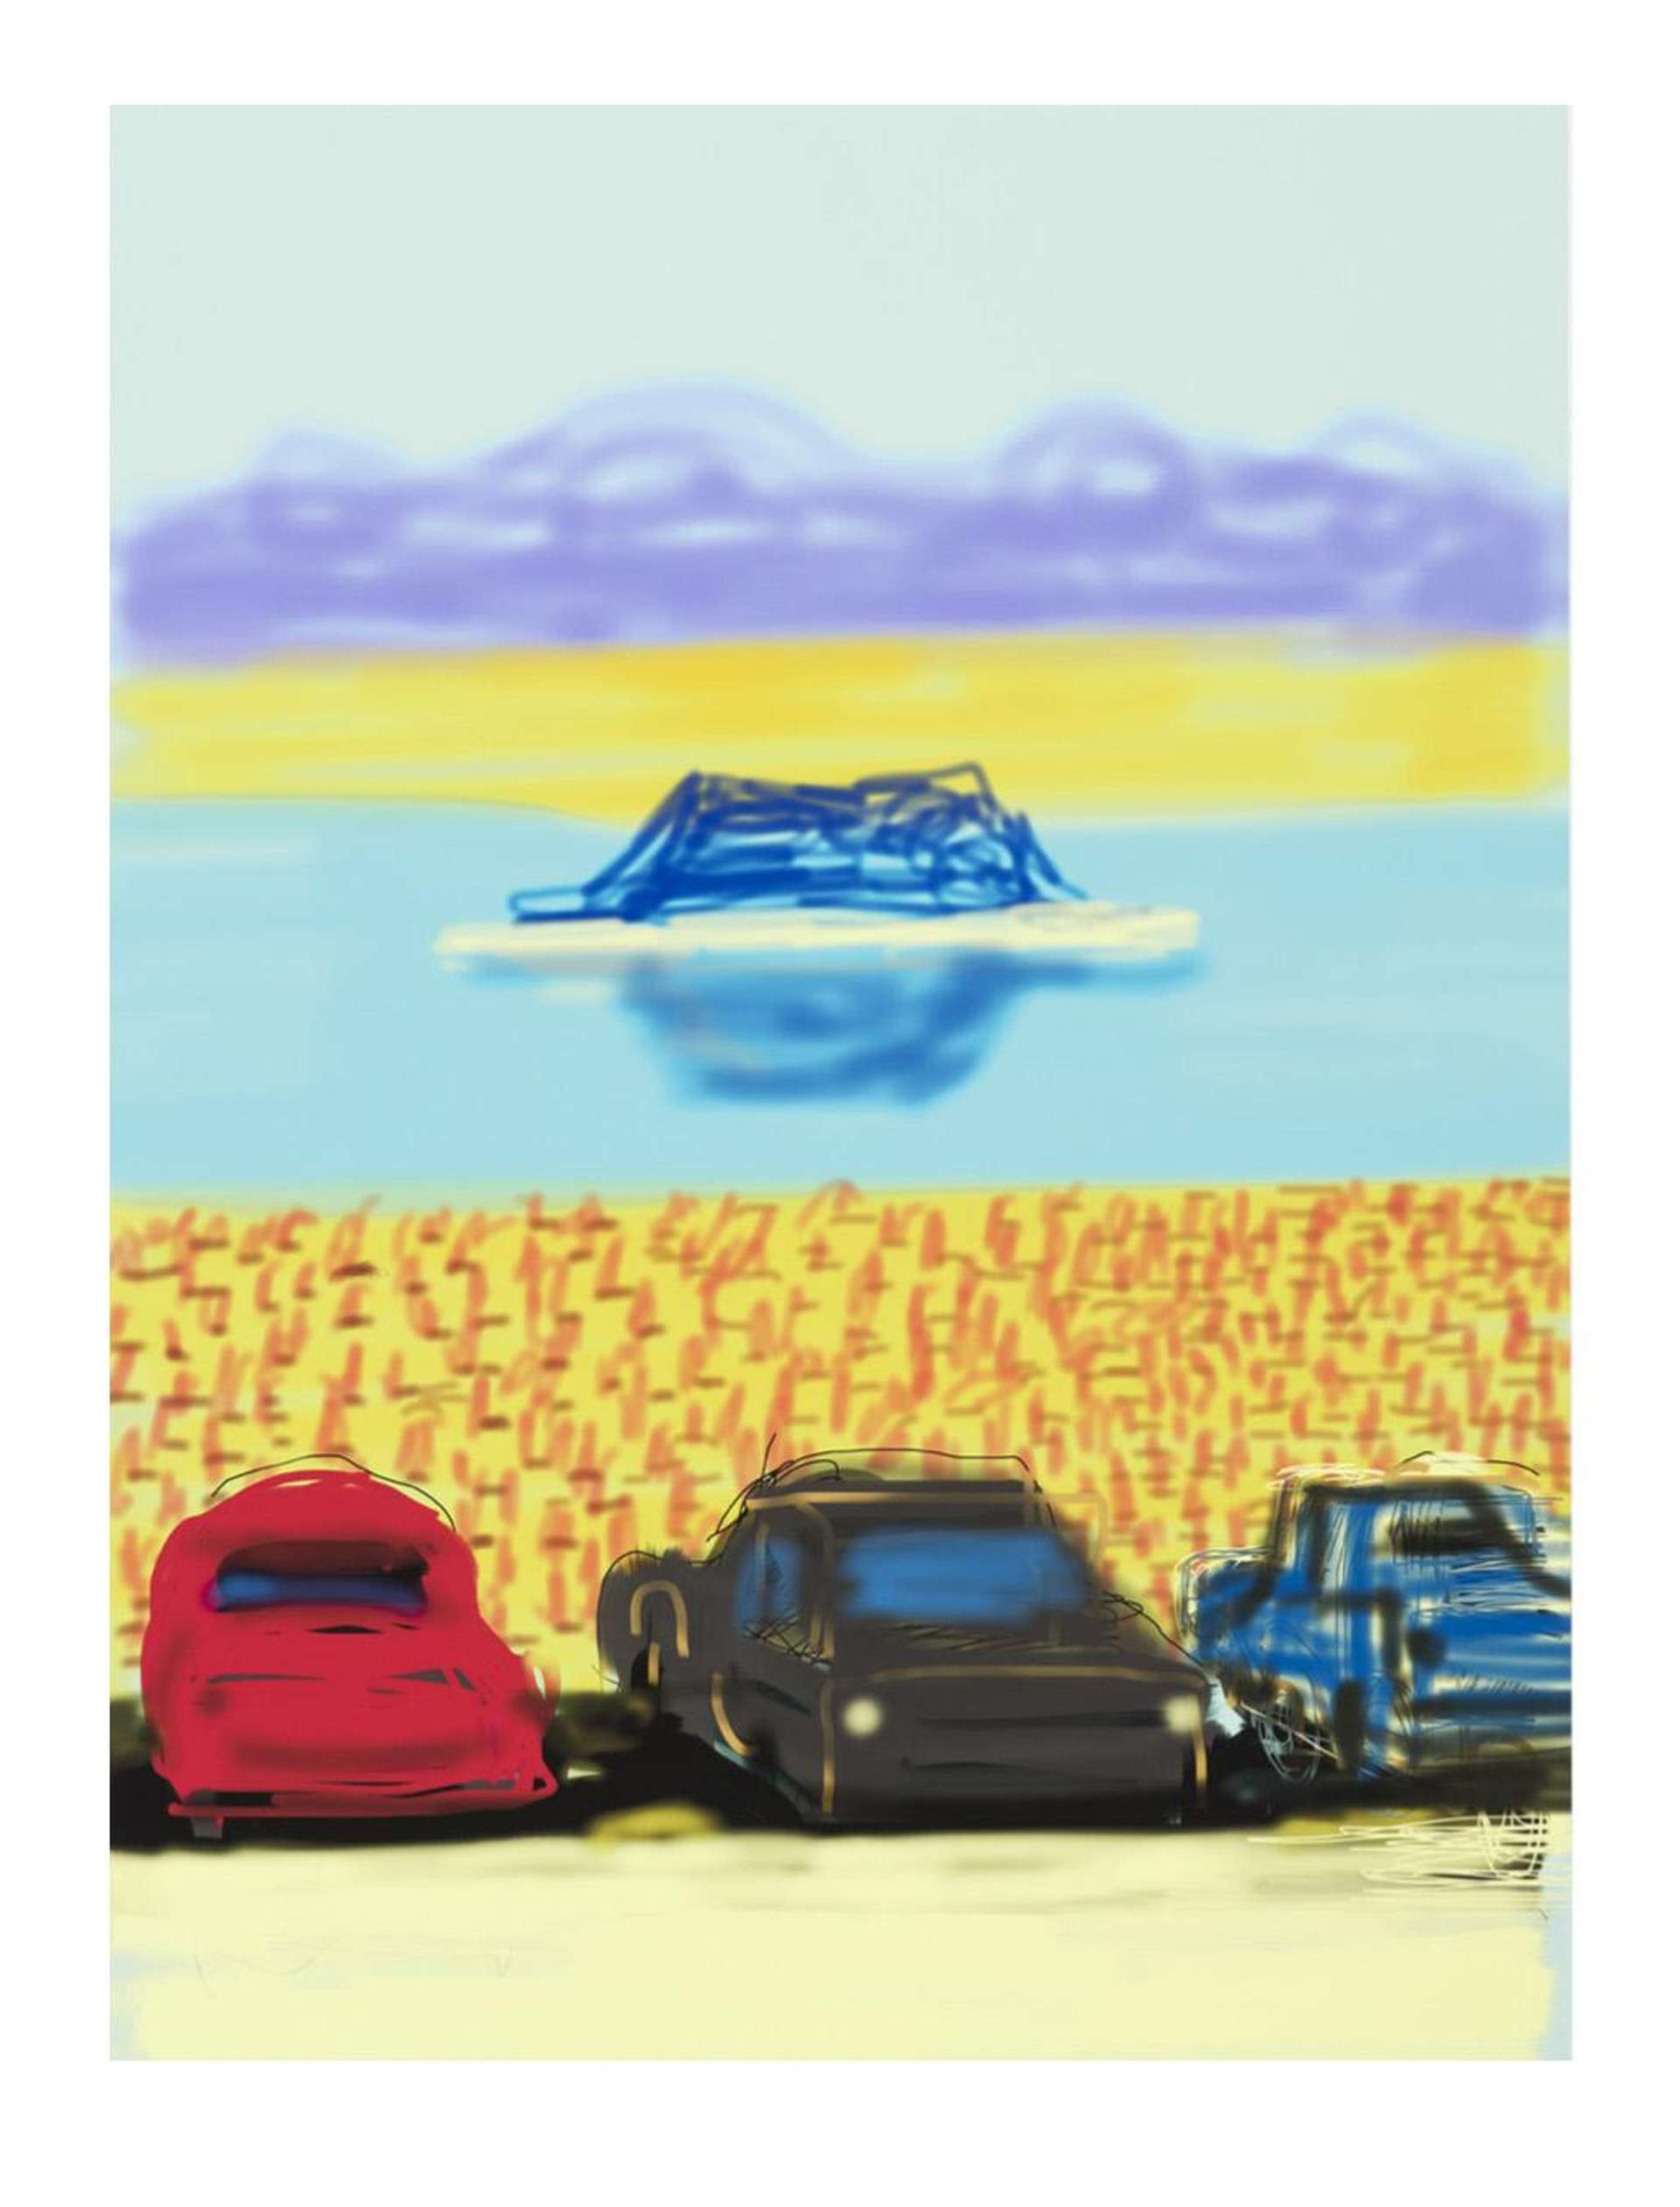 A colourful view of  three cars overlooking a lake by artist David Hockney. It shows a glacier floating in the lake ahead, with mountains looming in the background.